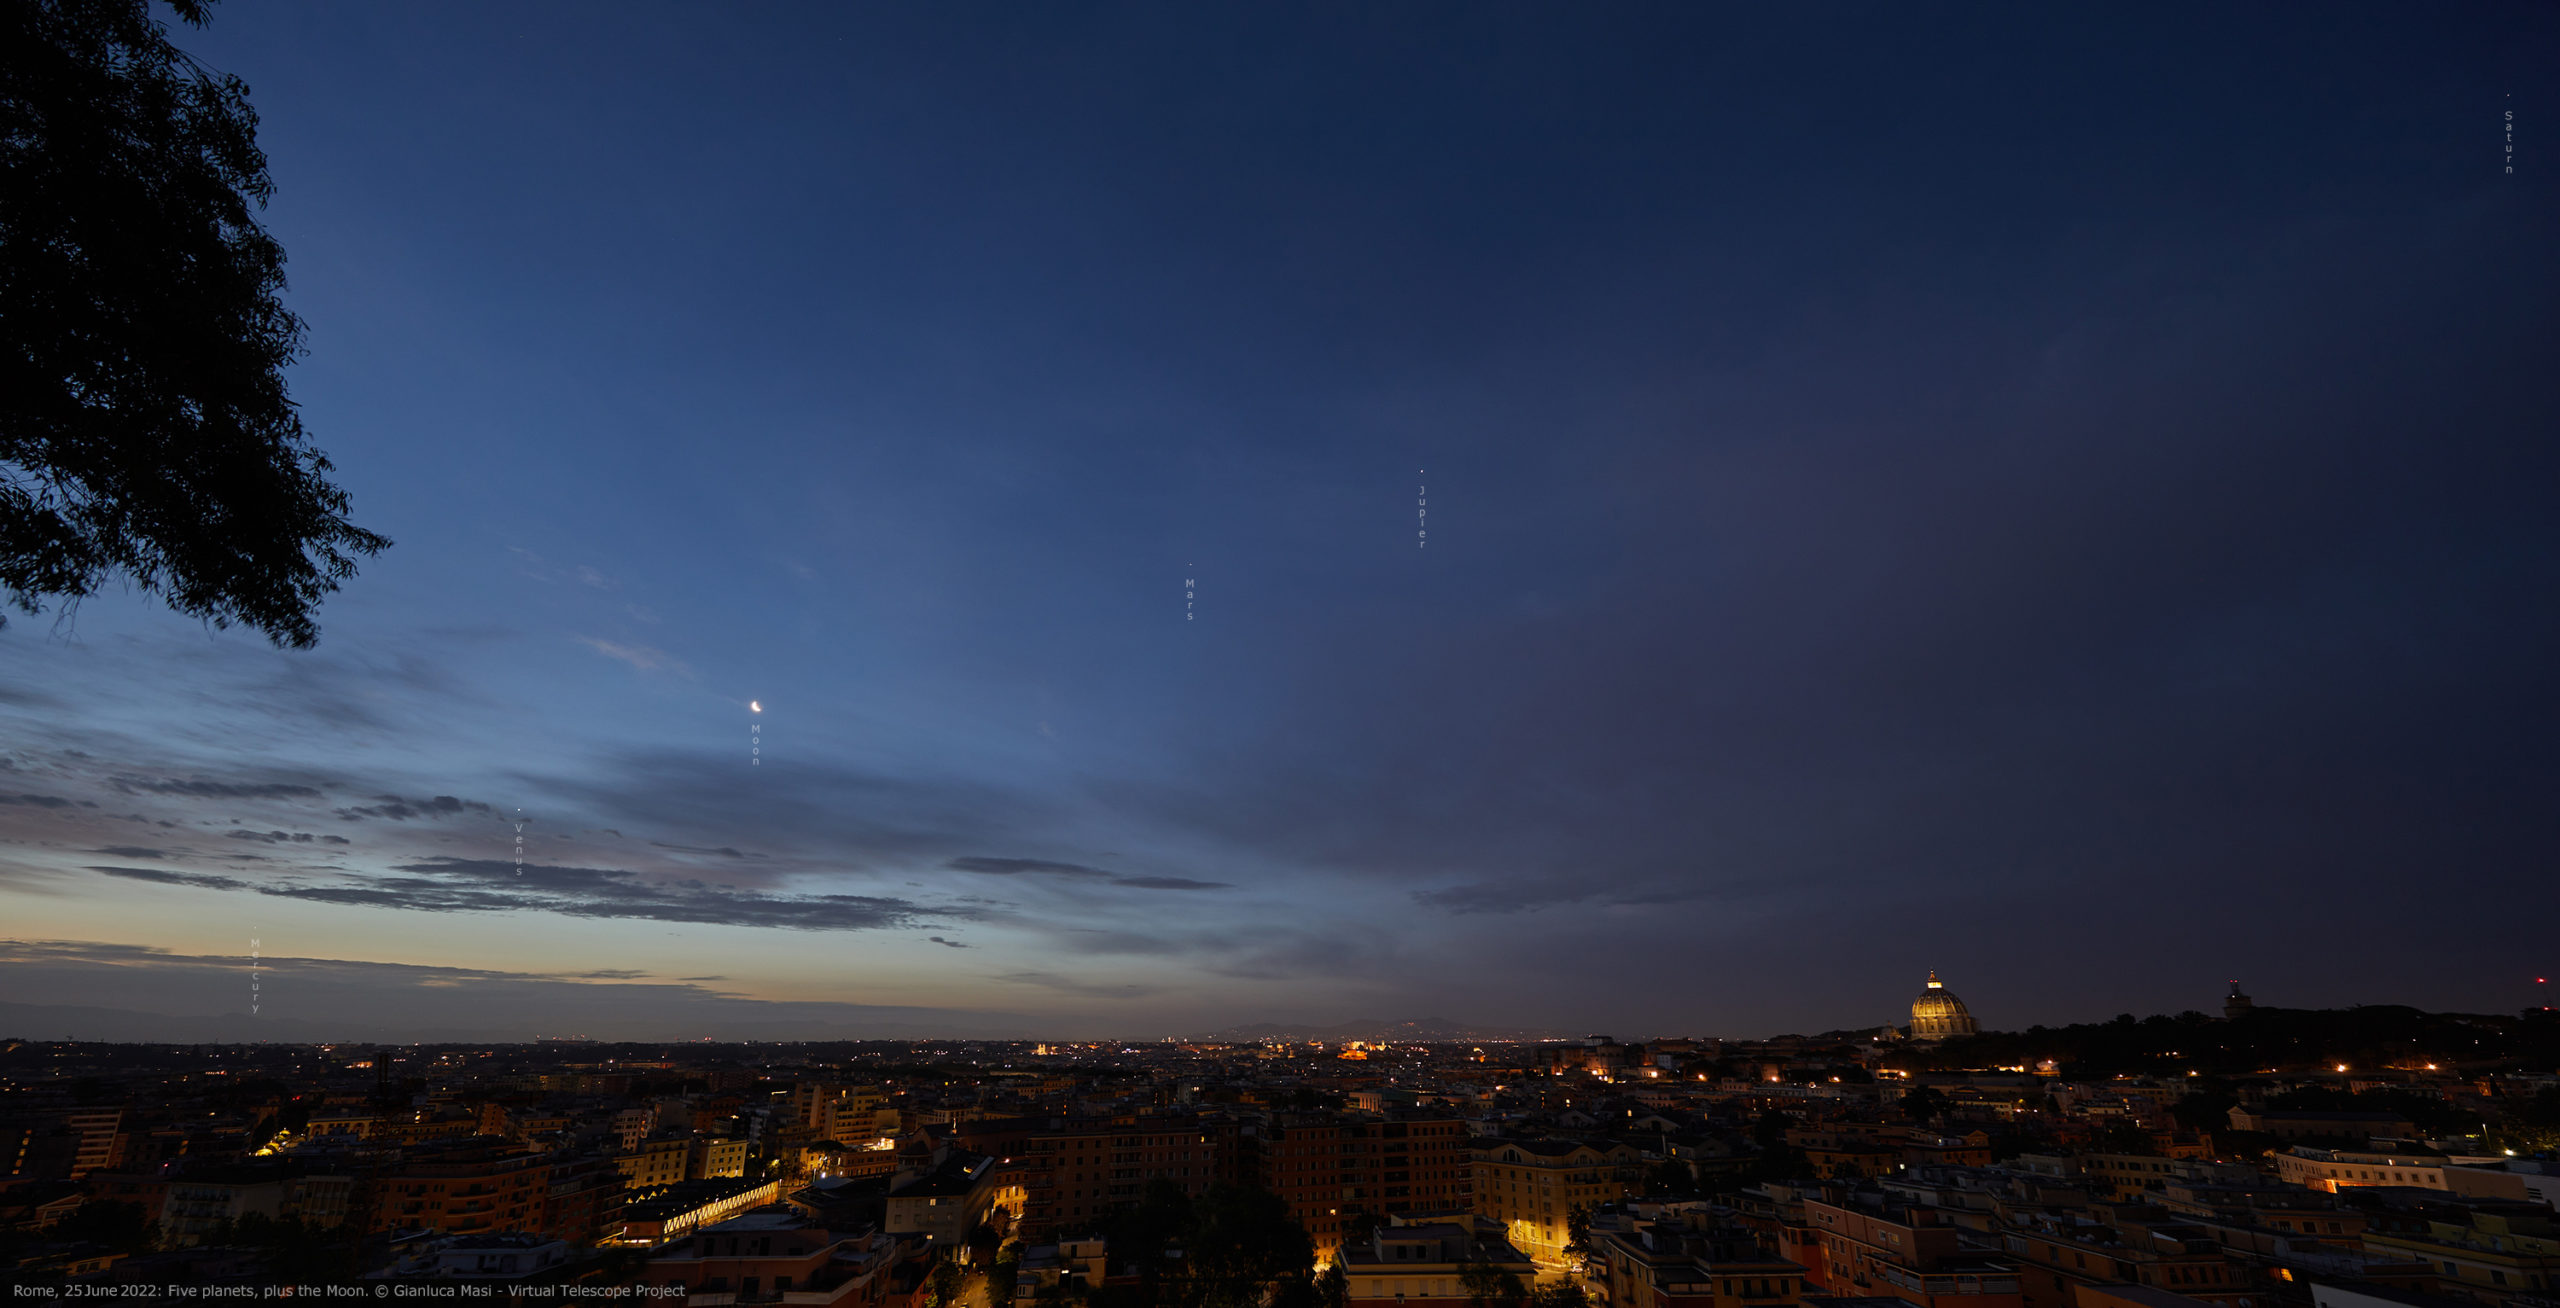 The five planets plus the Moon shine above Rome at dawn: the St. Peter’s Dome is clearly visible. 25 June 2022.